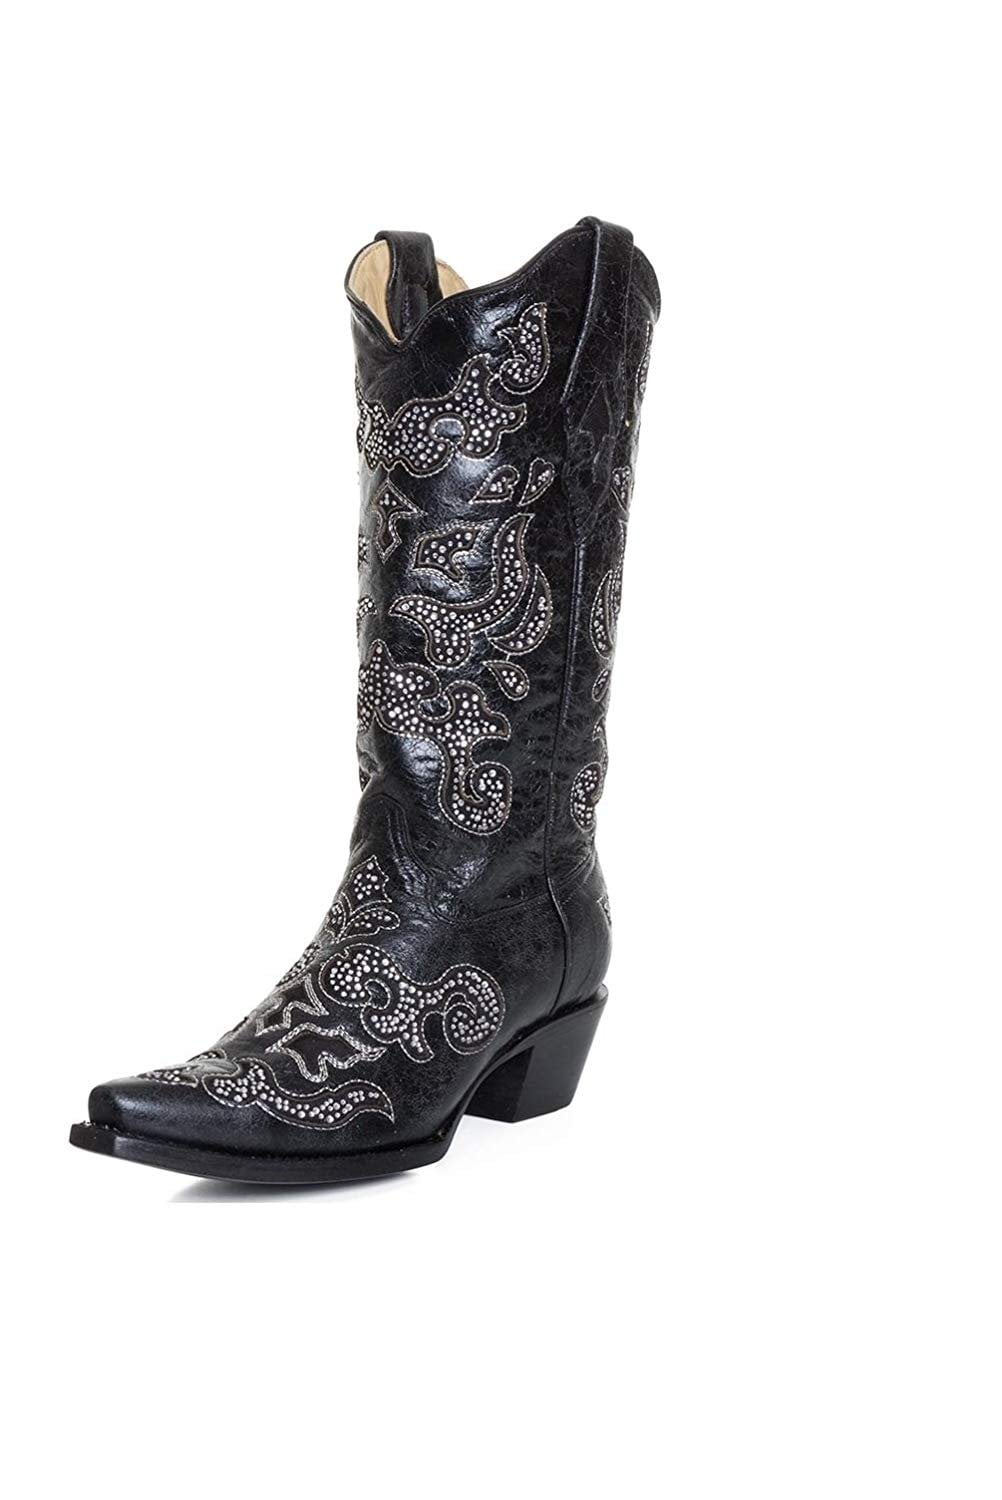 corral crystal boots